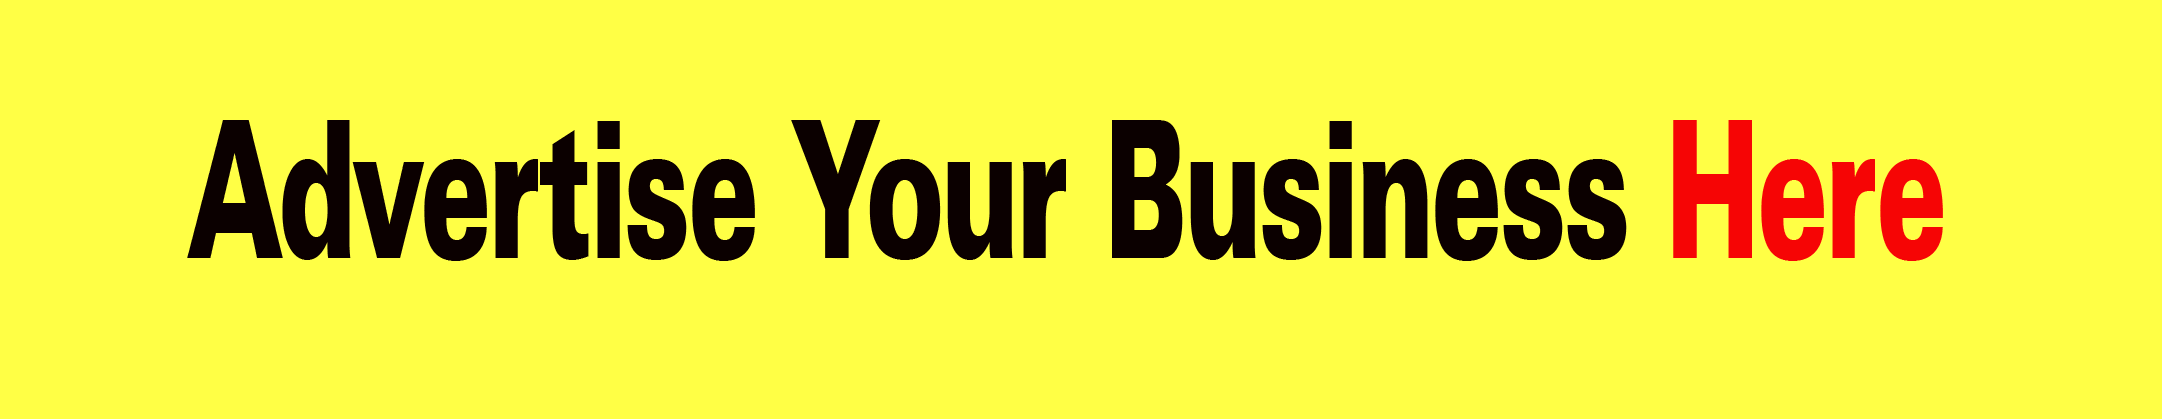 Advertise Your Business GIF long